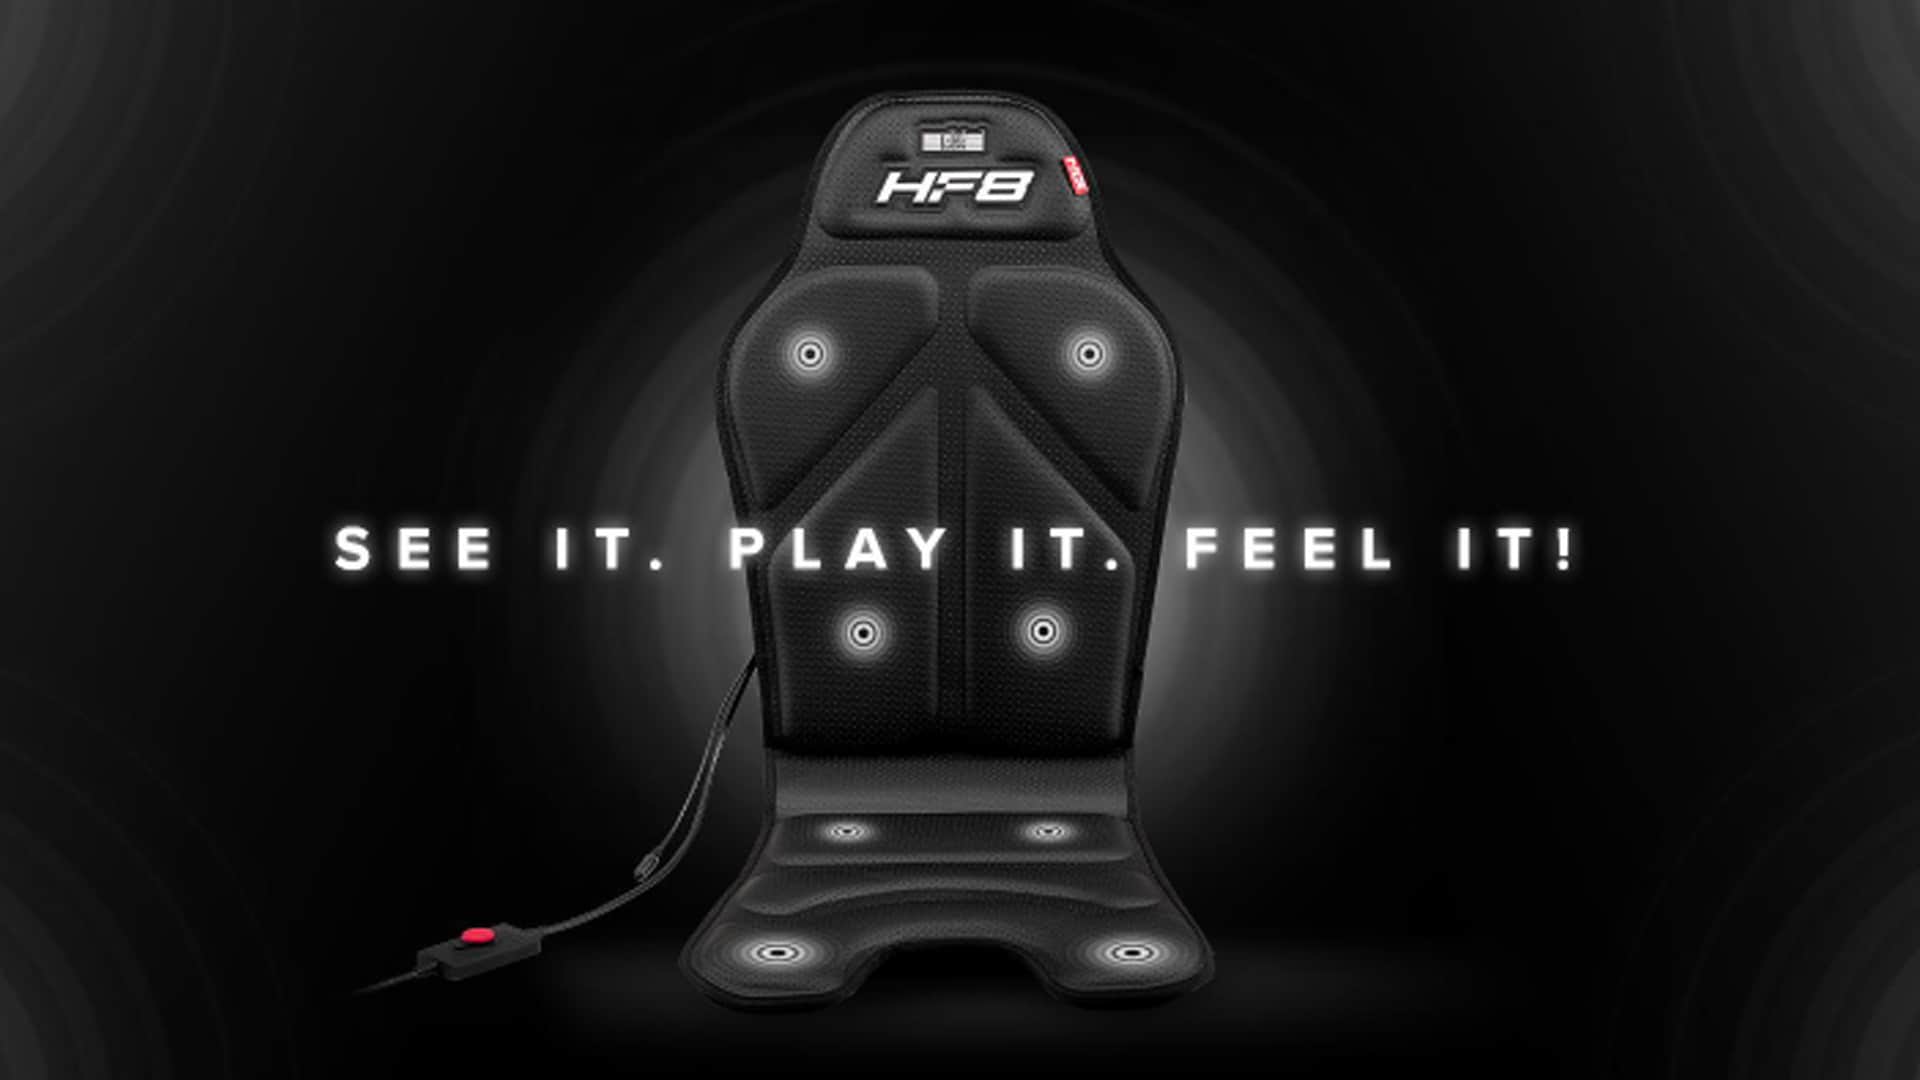 Next Level Racing's HF8 haptic feedback gaming pad available this month